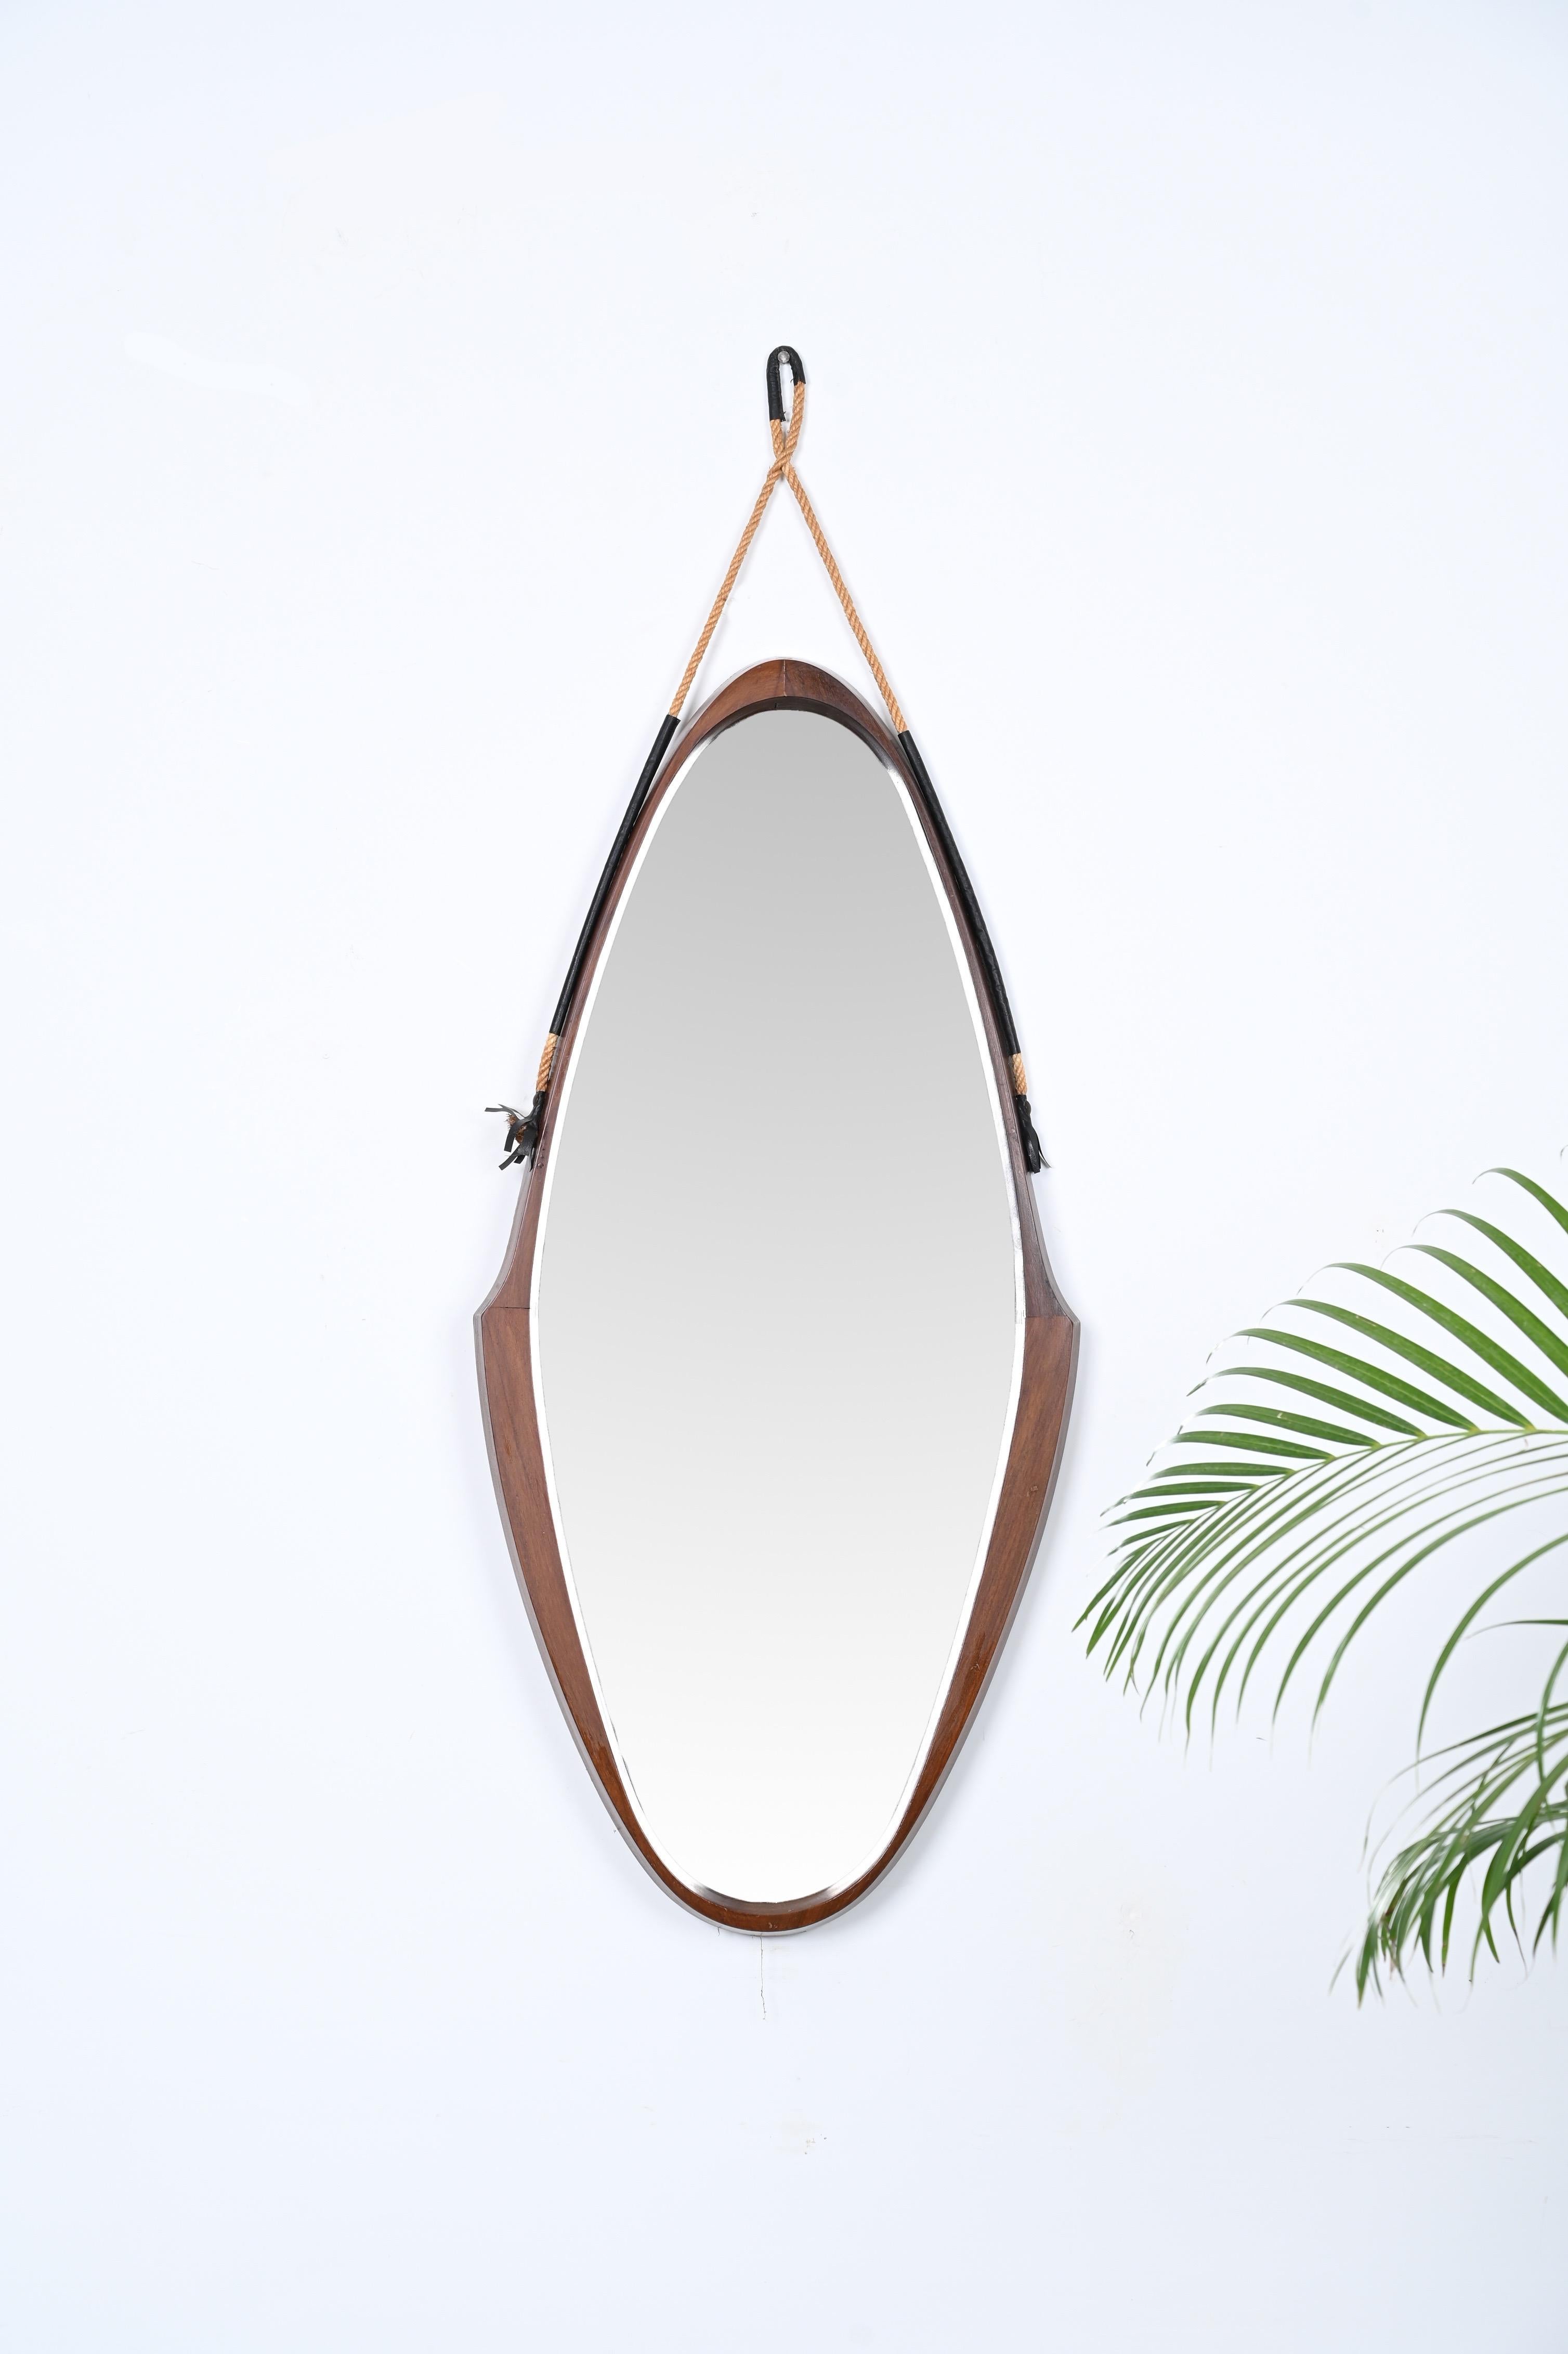 Stunning midcentury wall mirror designed in Italy during the 1960s. 

This elgant mirror features an astonishing oval shield-shaped frame made in a stunning curved teak wood, the structure seems to float thanks to the rope which is enriched at the